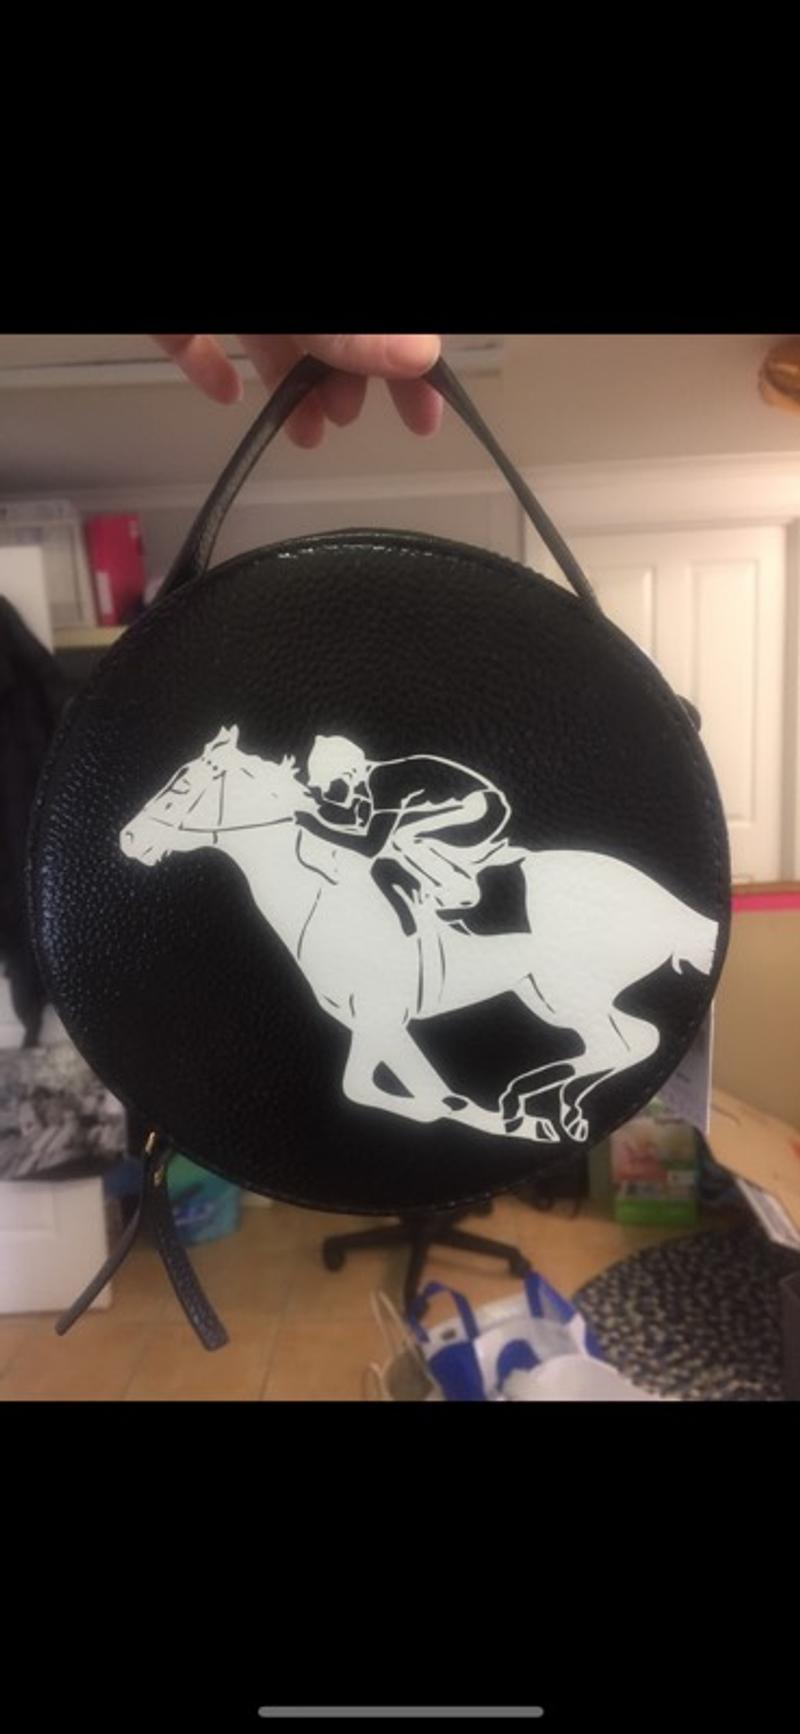 Giddy up black and white bag